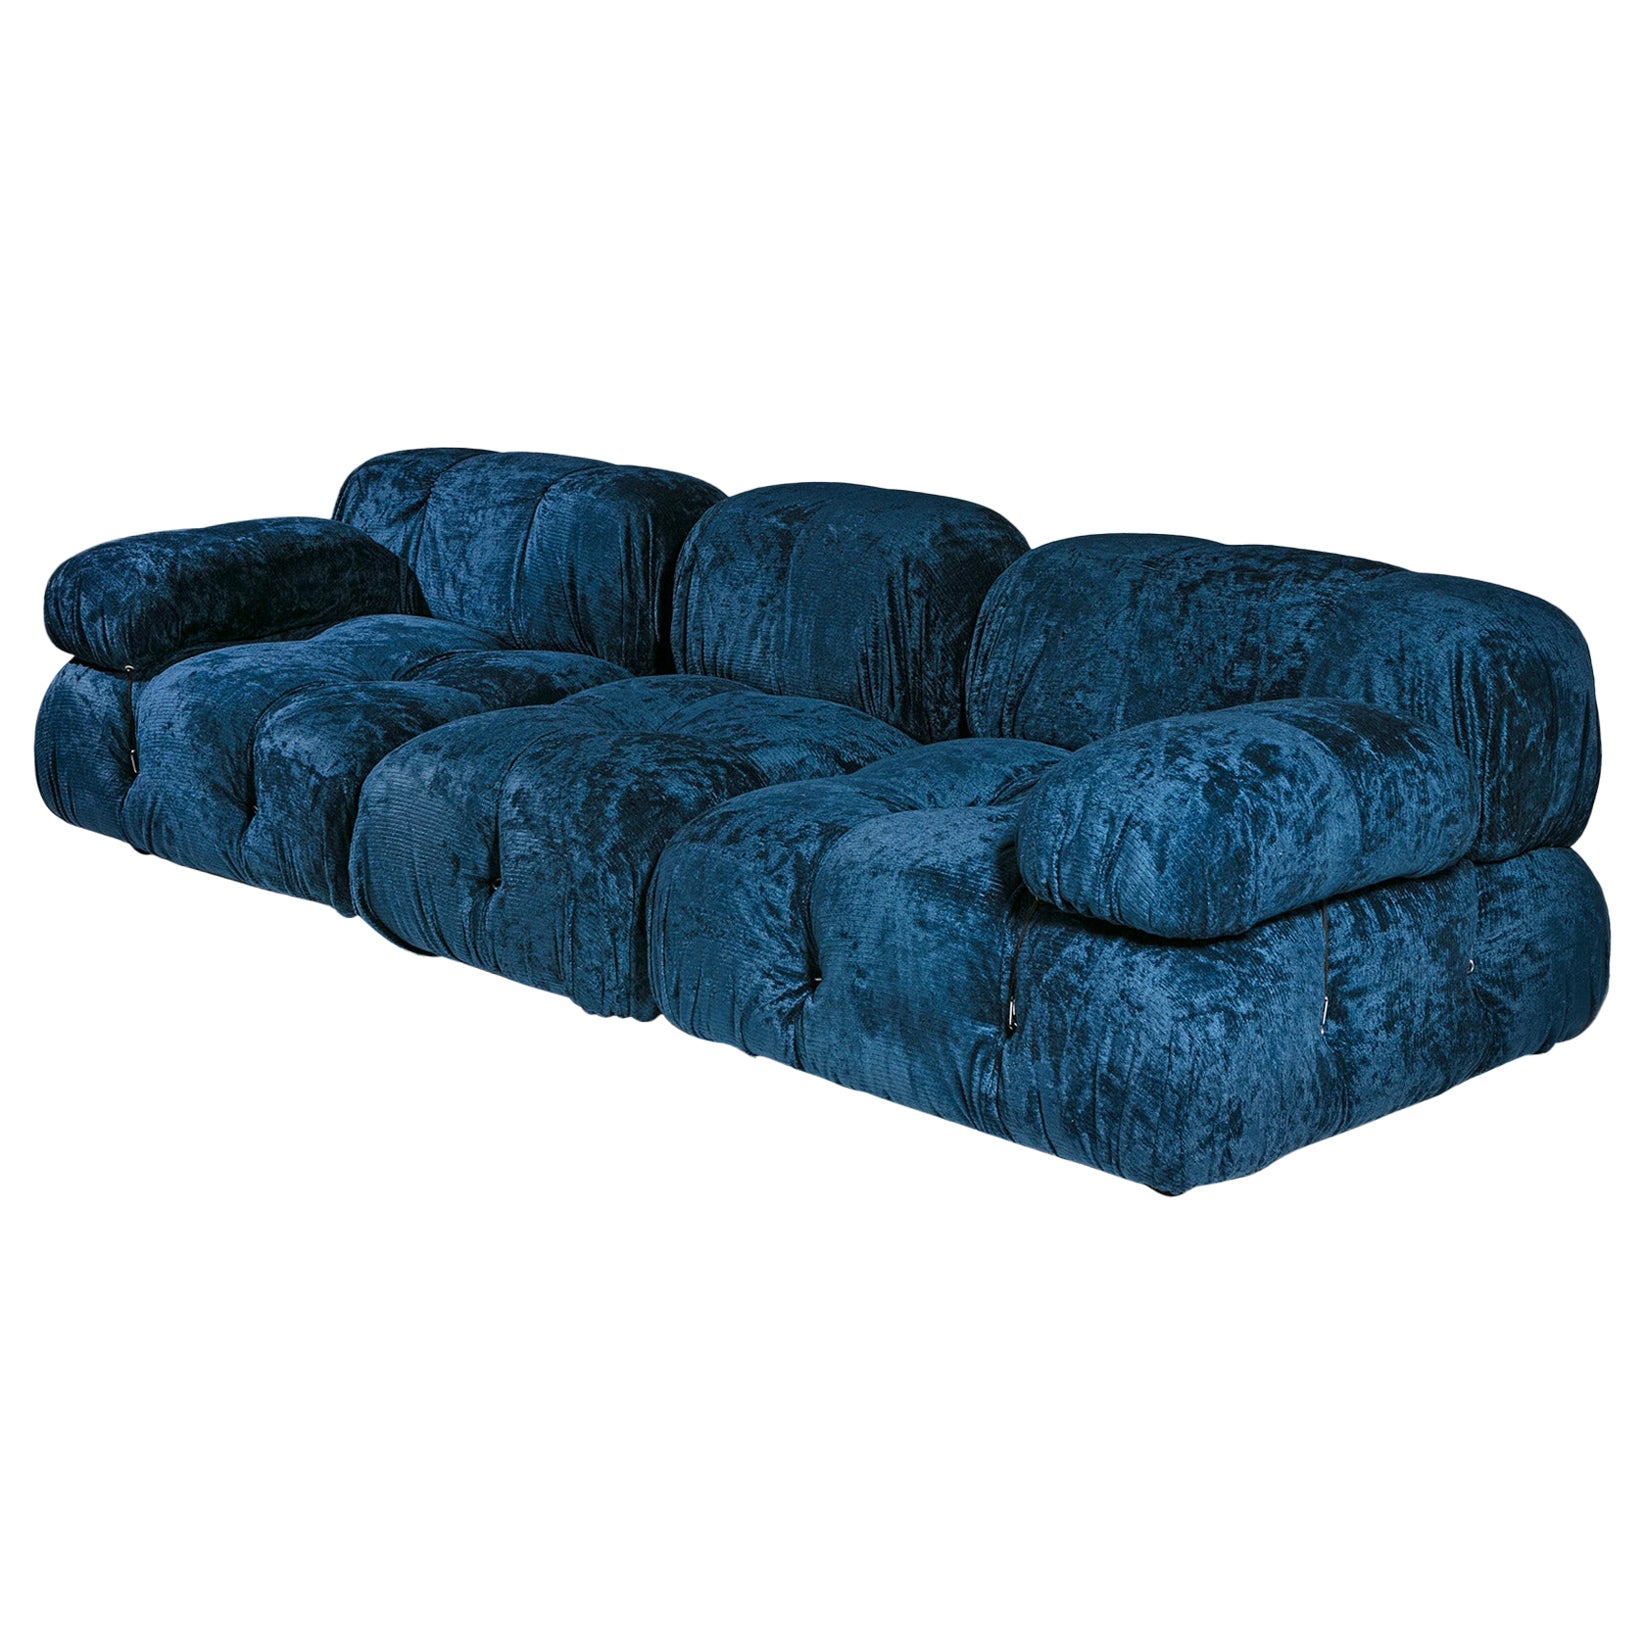 Blue Chenille "Camaleonda" Sectional sofa by Mario Bellini for B&B, Italy, 1970s For Sale